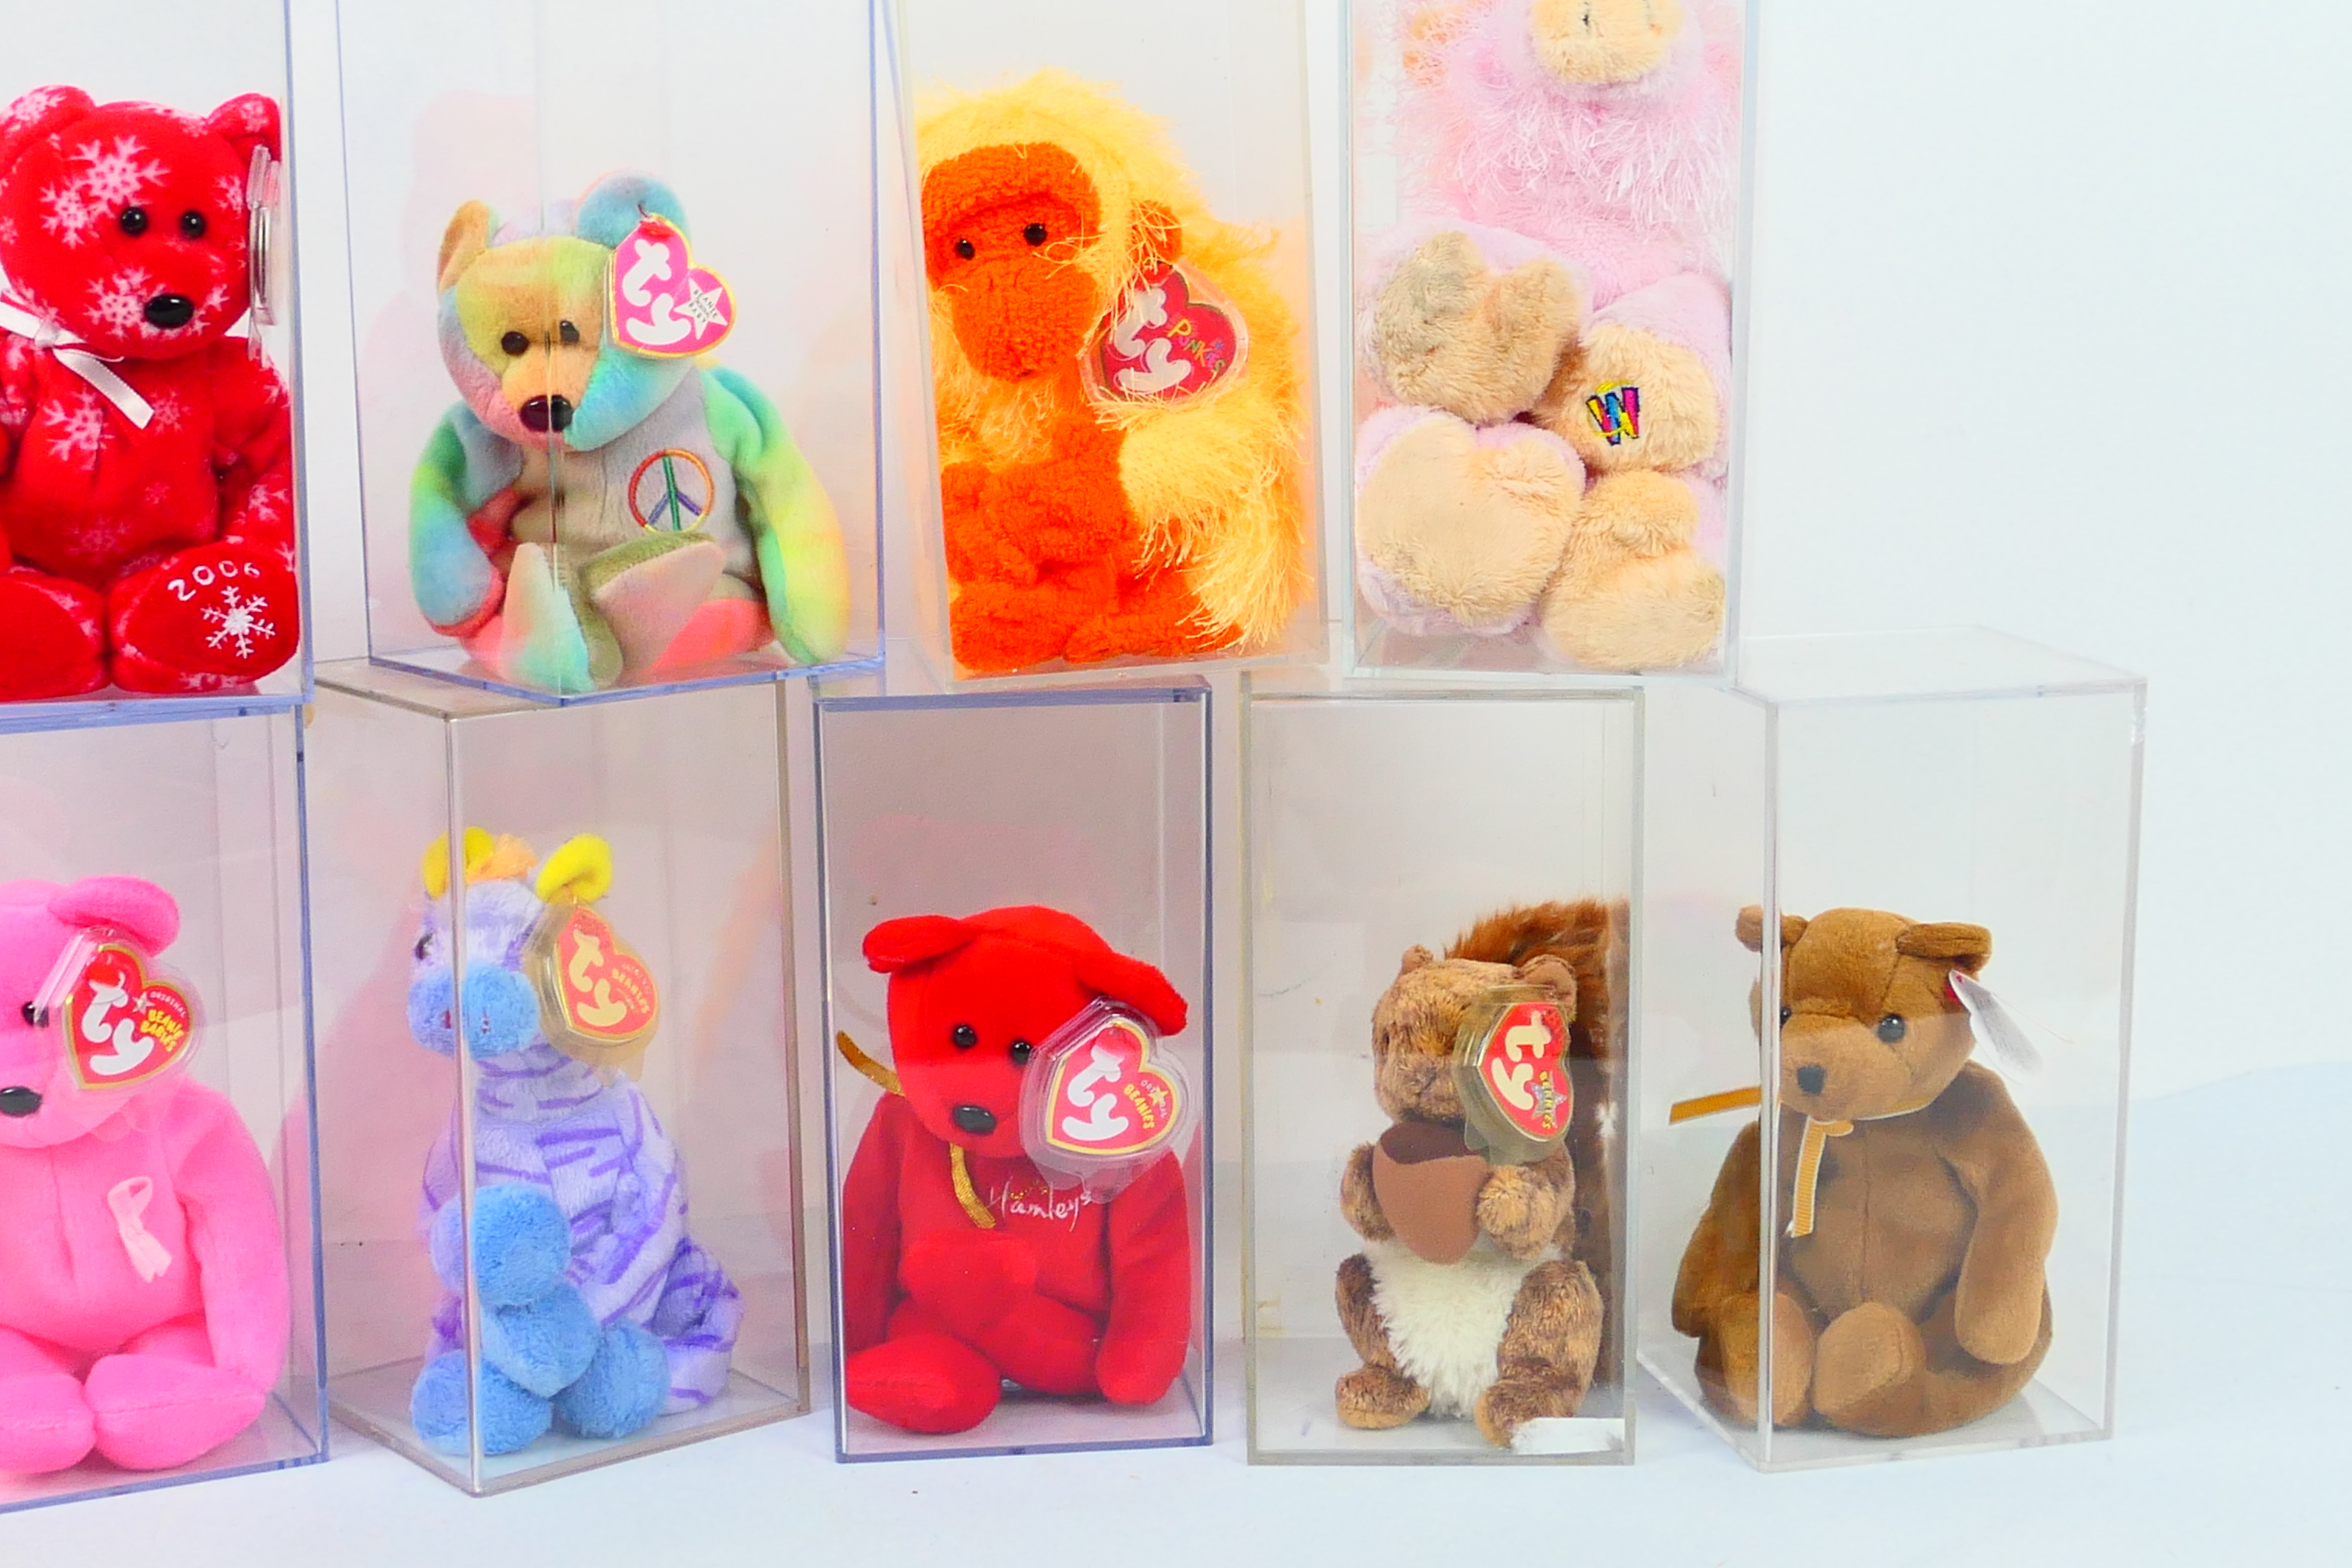 Ty Beanies - 11 Ty Beanies housed within perspex display cases. - Image 3 of 3